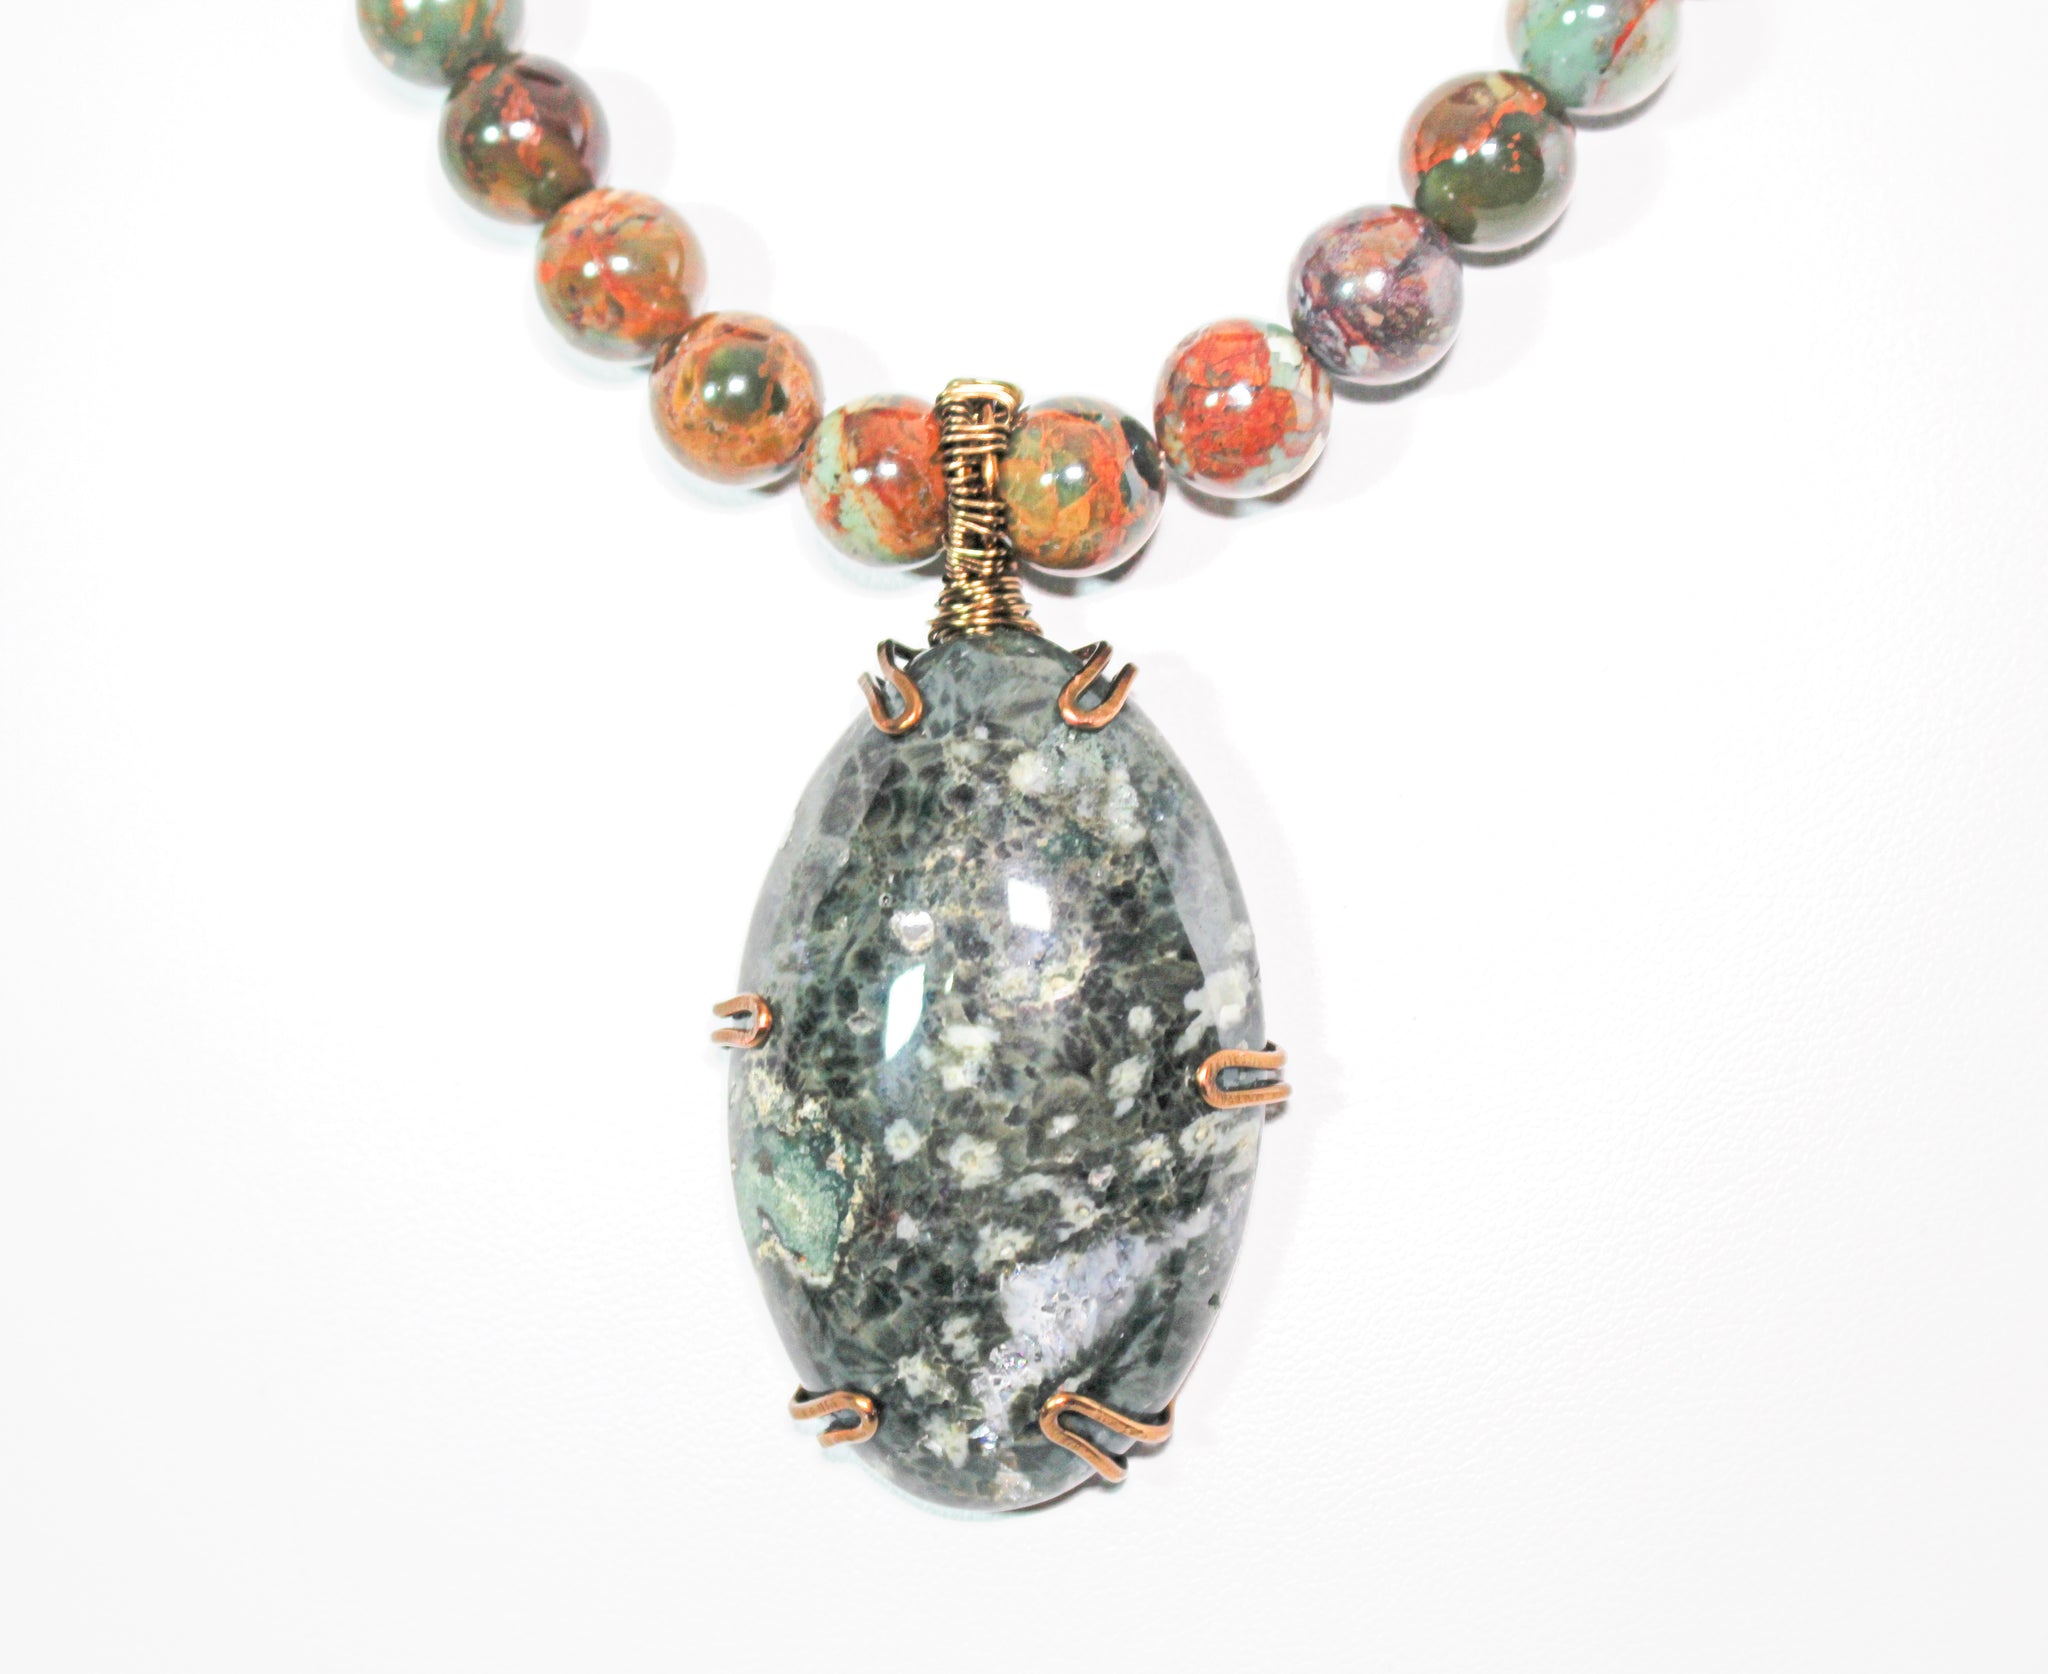 KD-0105 African Green Opal Necklace w/ Serpentine Stone Pendant, 20 Inches